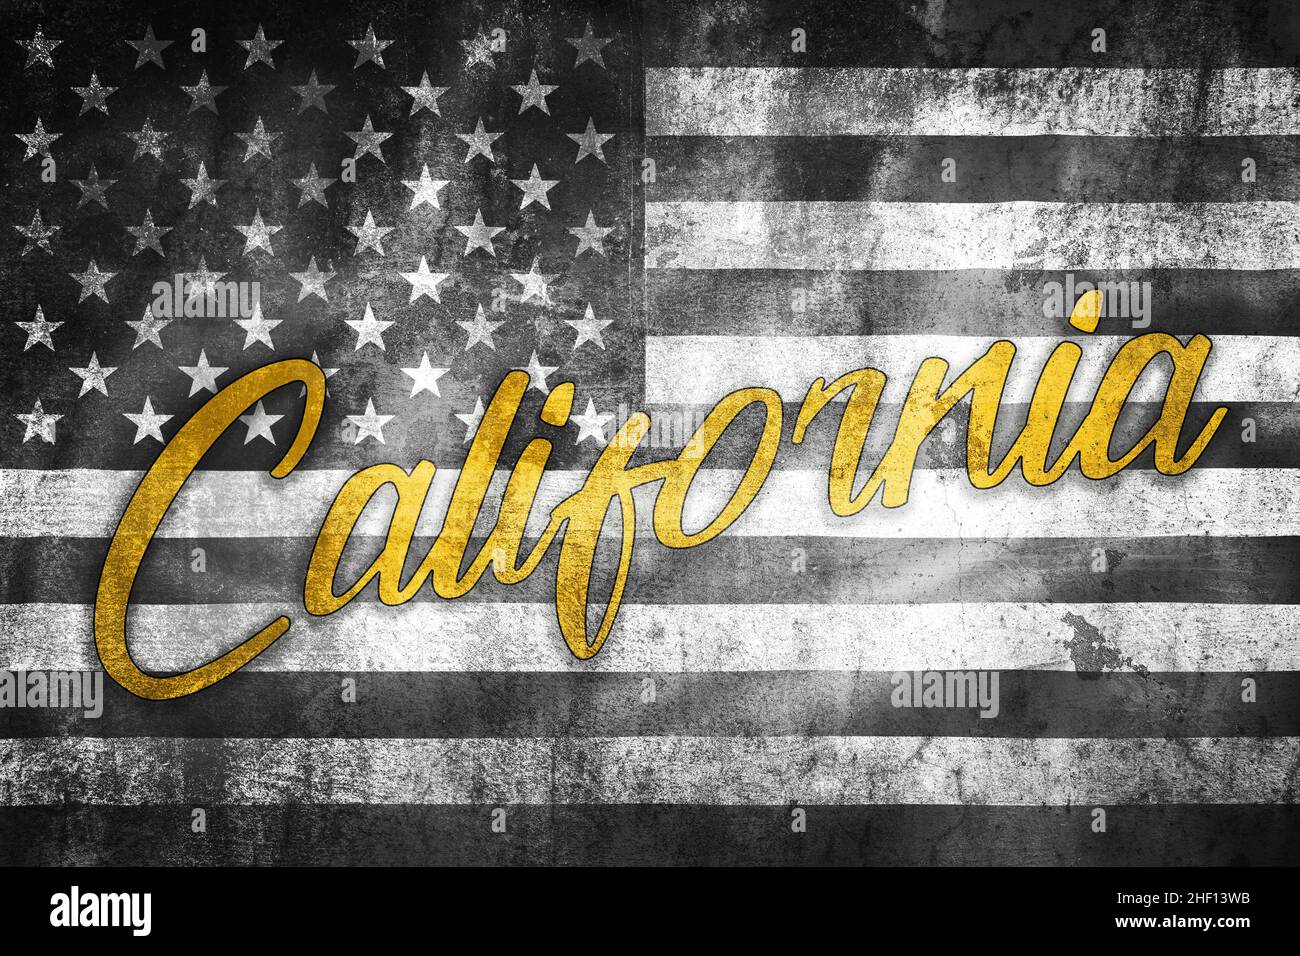 California USA banner illustration on grunge black and white US flag, travel destination in United stares of America Stock Photo